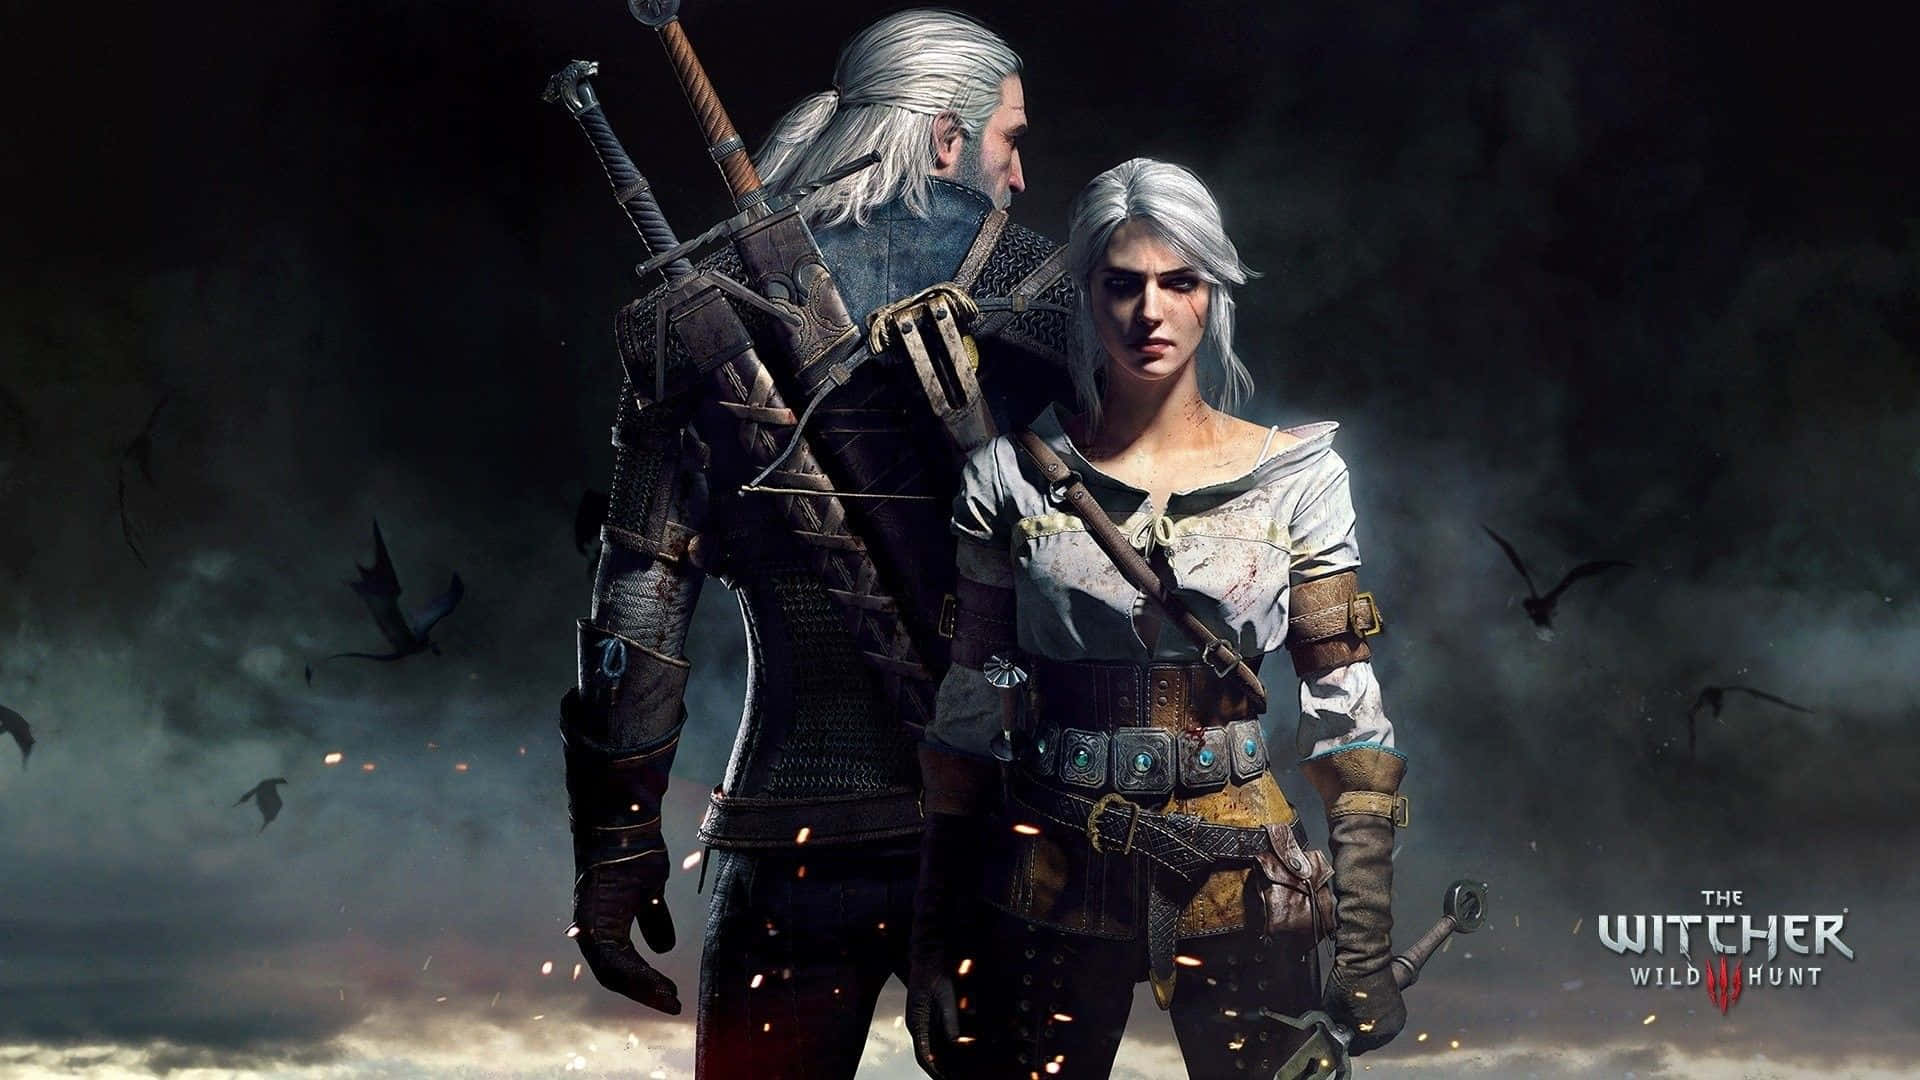 Enactionfylld Scen Från The Witcher. Wallpaper